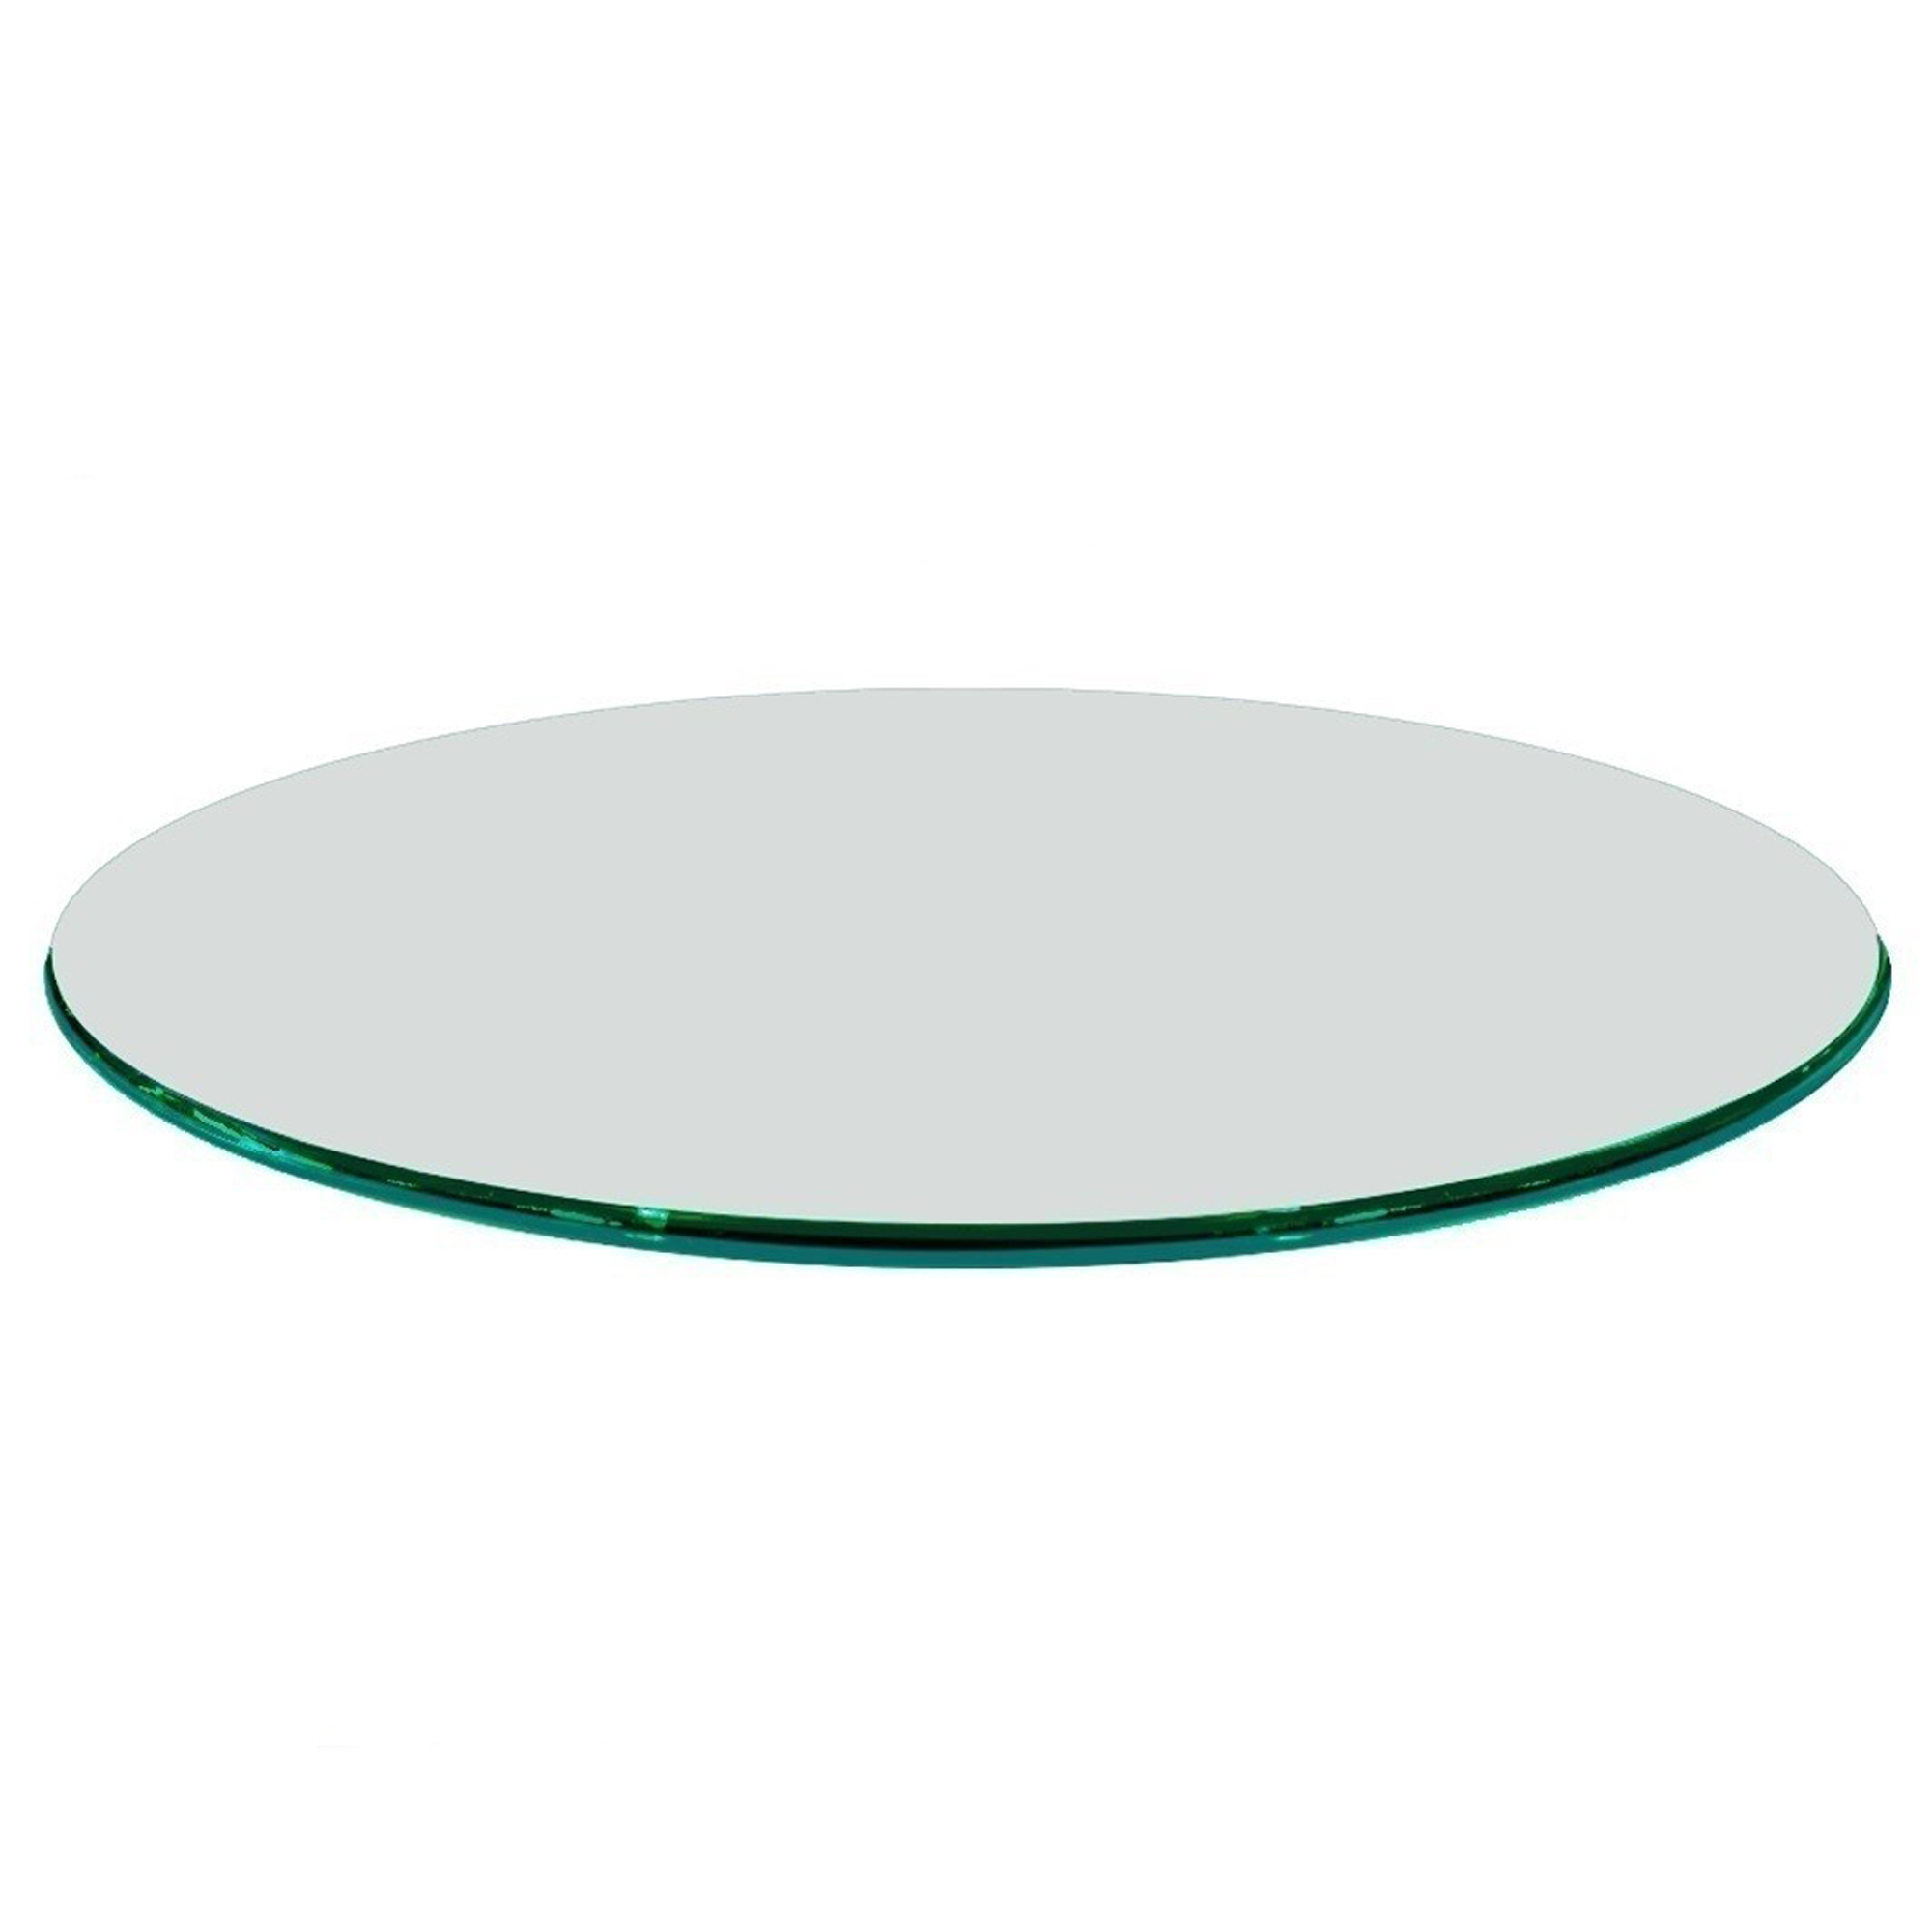 Round Glass Dining Table Tops, Round Plexiglass Table Topper